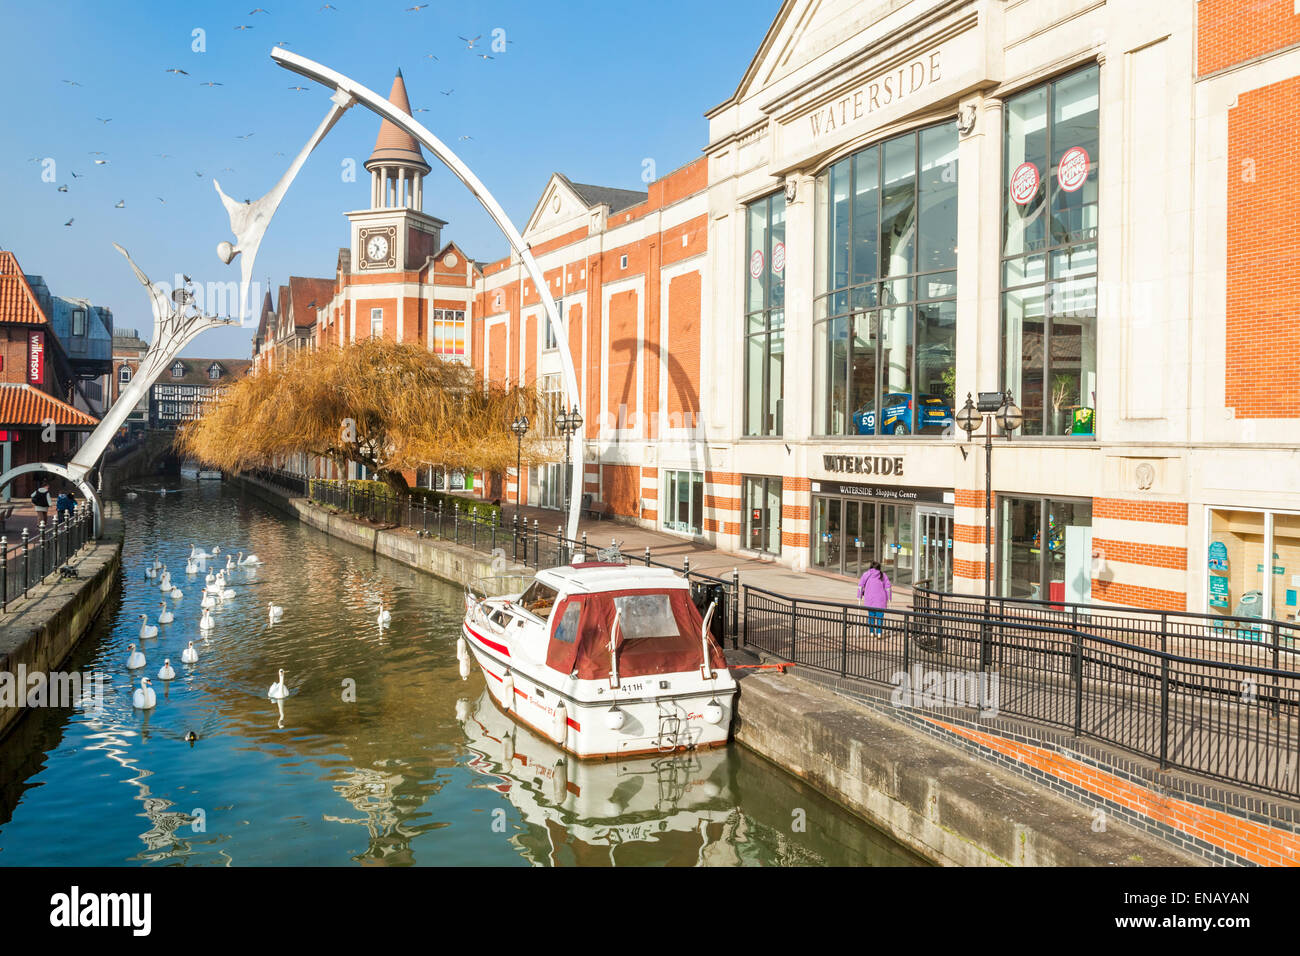 The River Witham, the Empowerment sculpture and the Waterside shopping centre in Lincoln city centre, England, UK Stock Photo